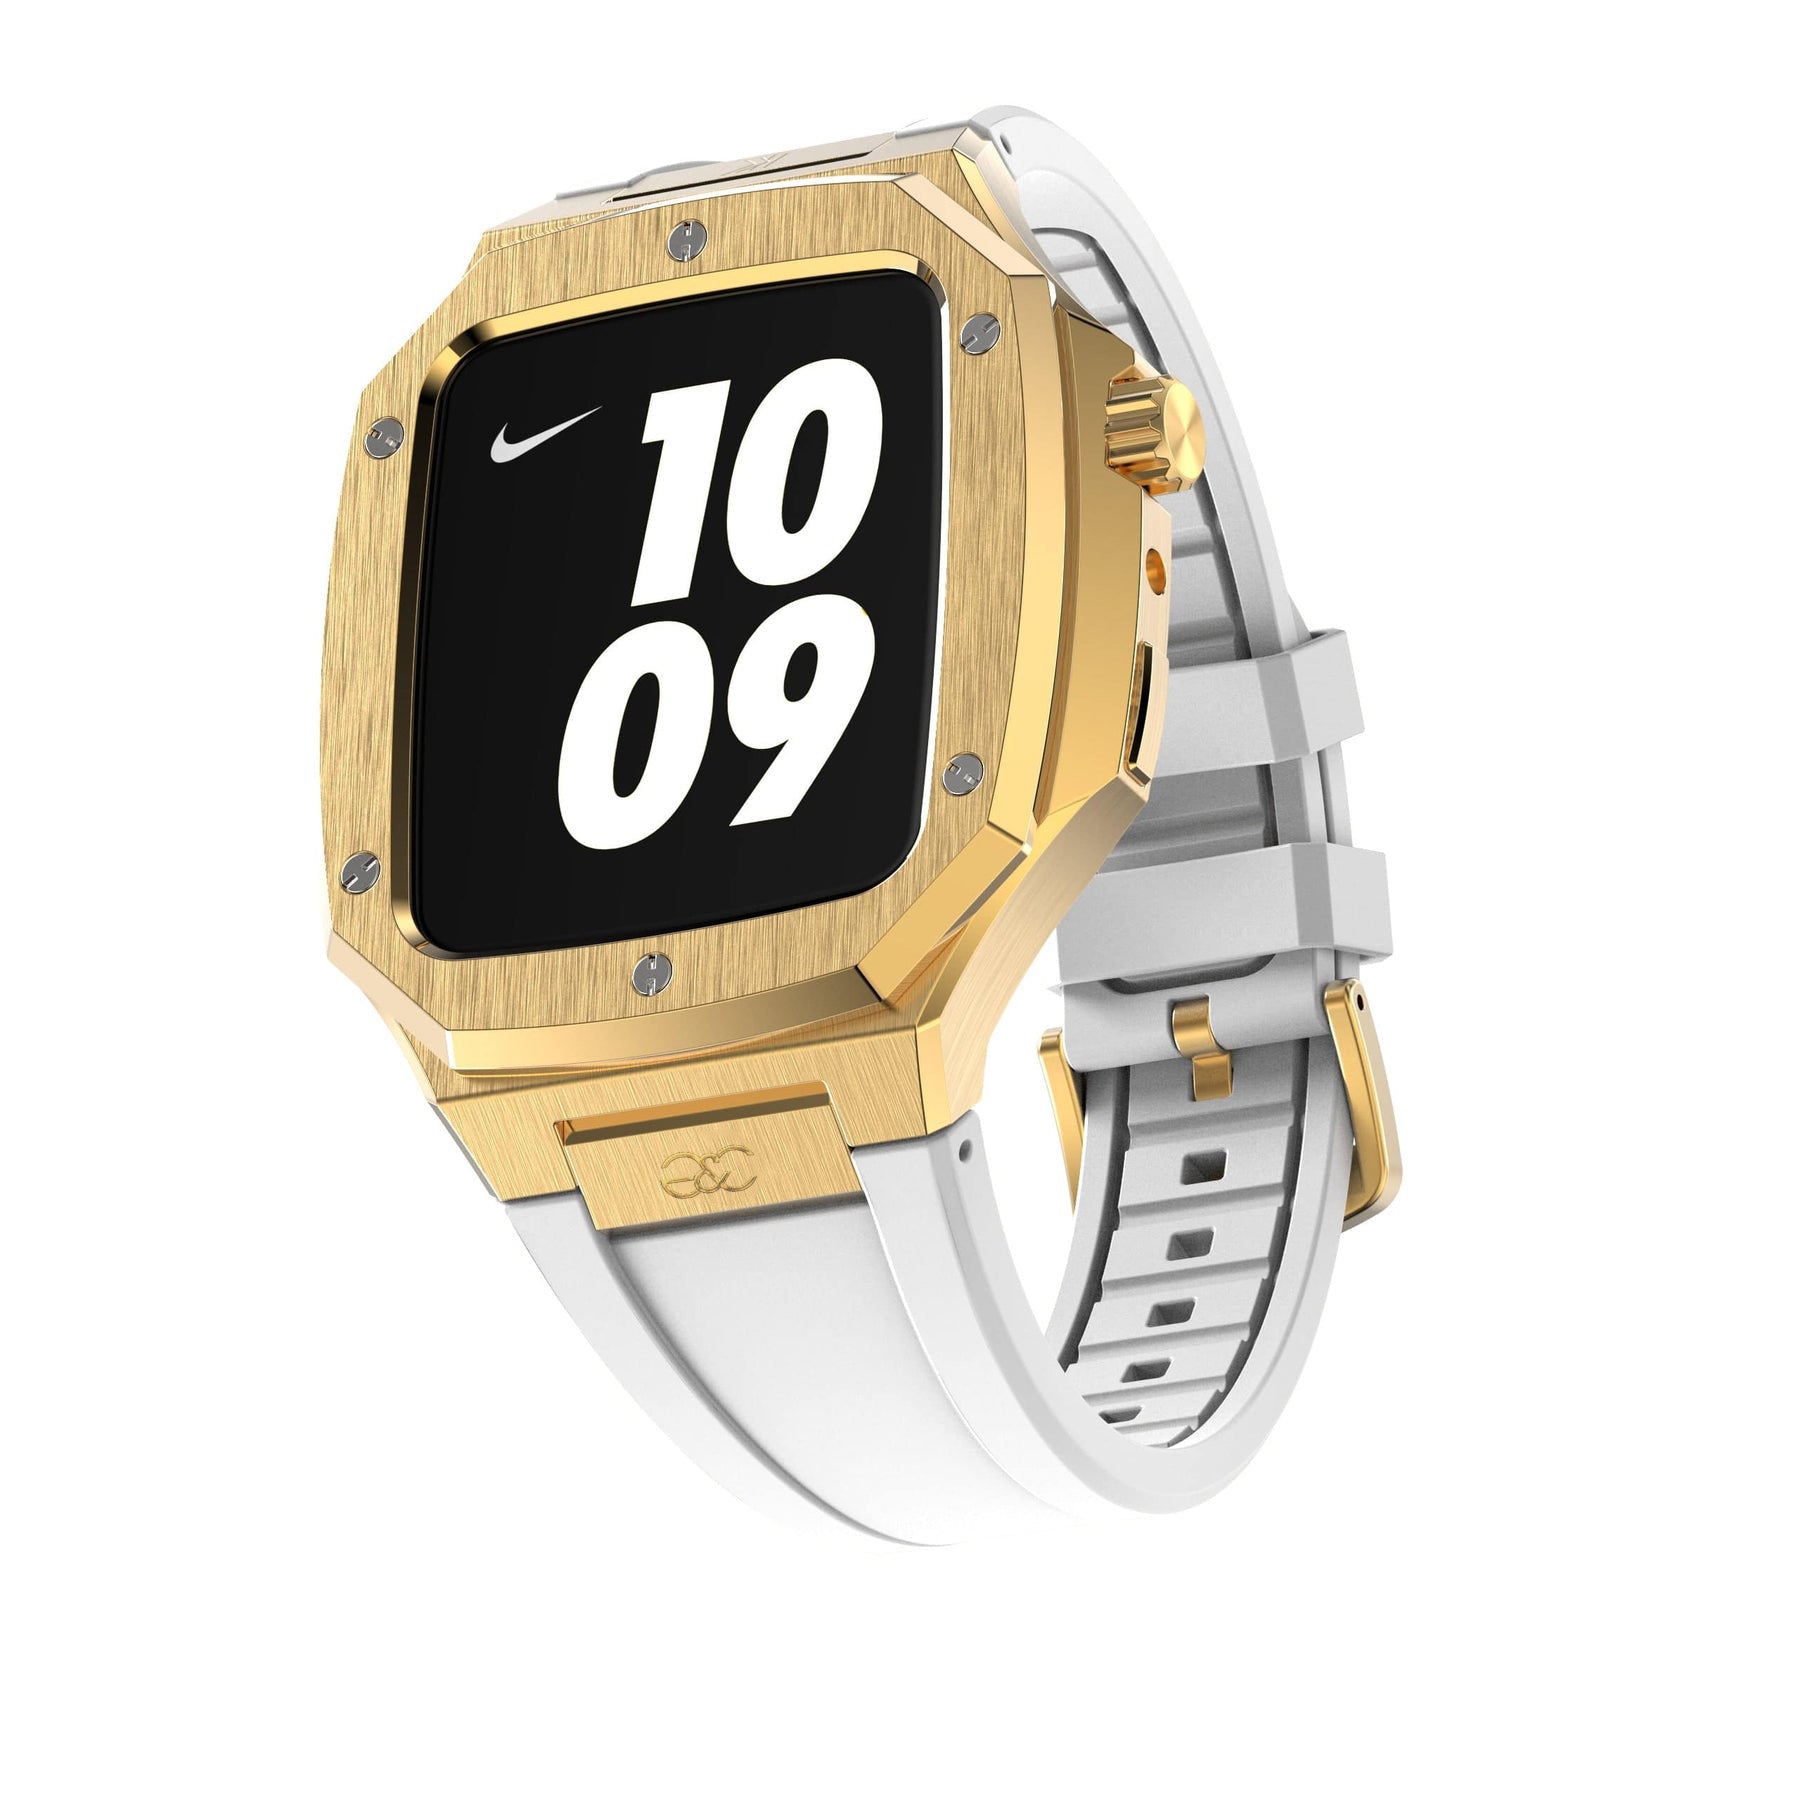 Apple Watch Gold Steel case (Silicone band) - G&C Watch